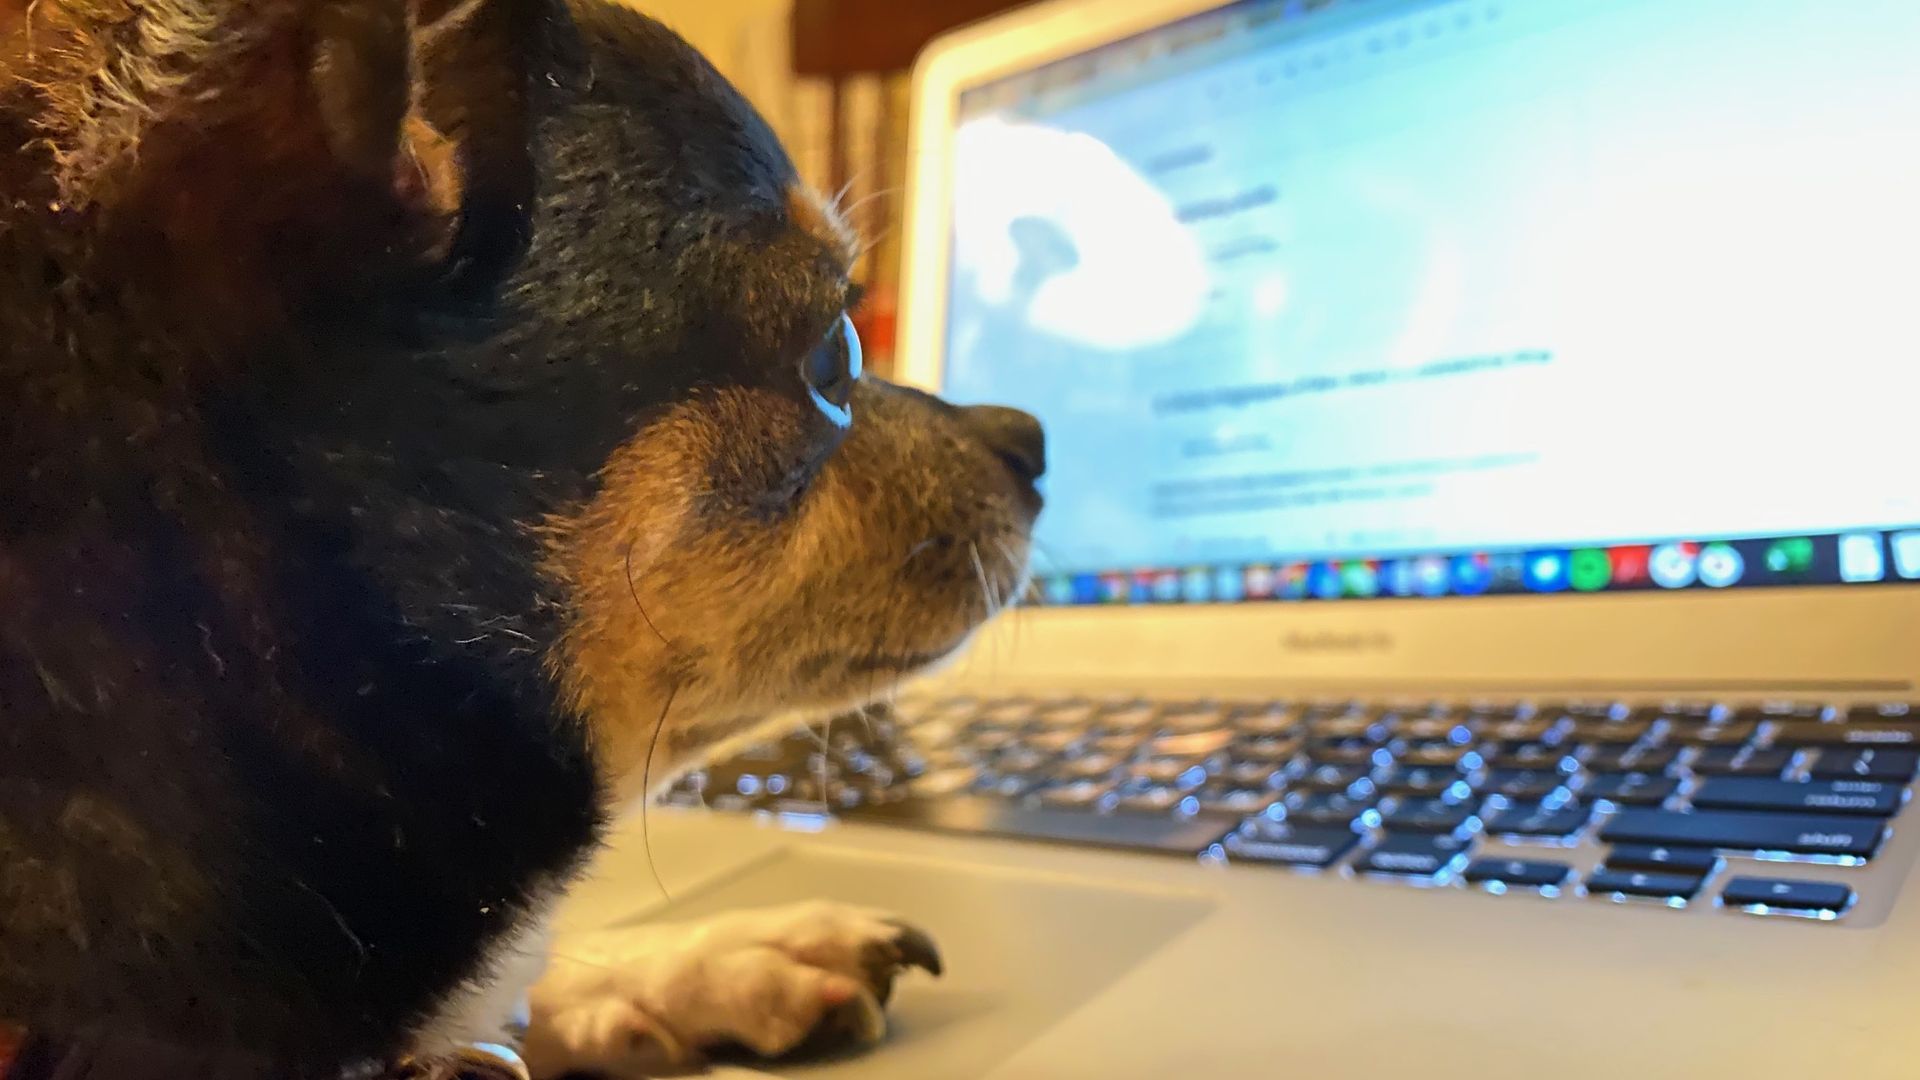 A photo of a dog looking at a computer